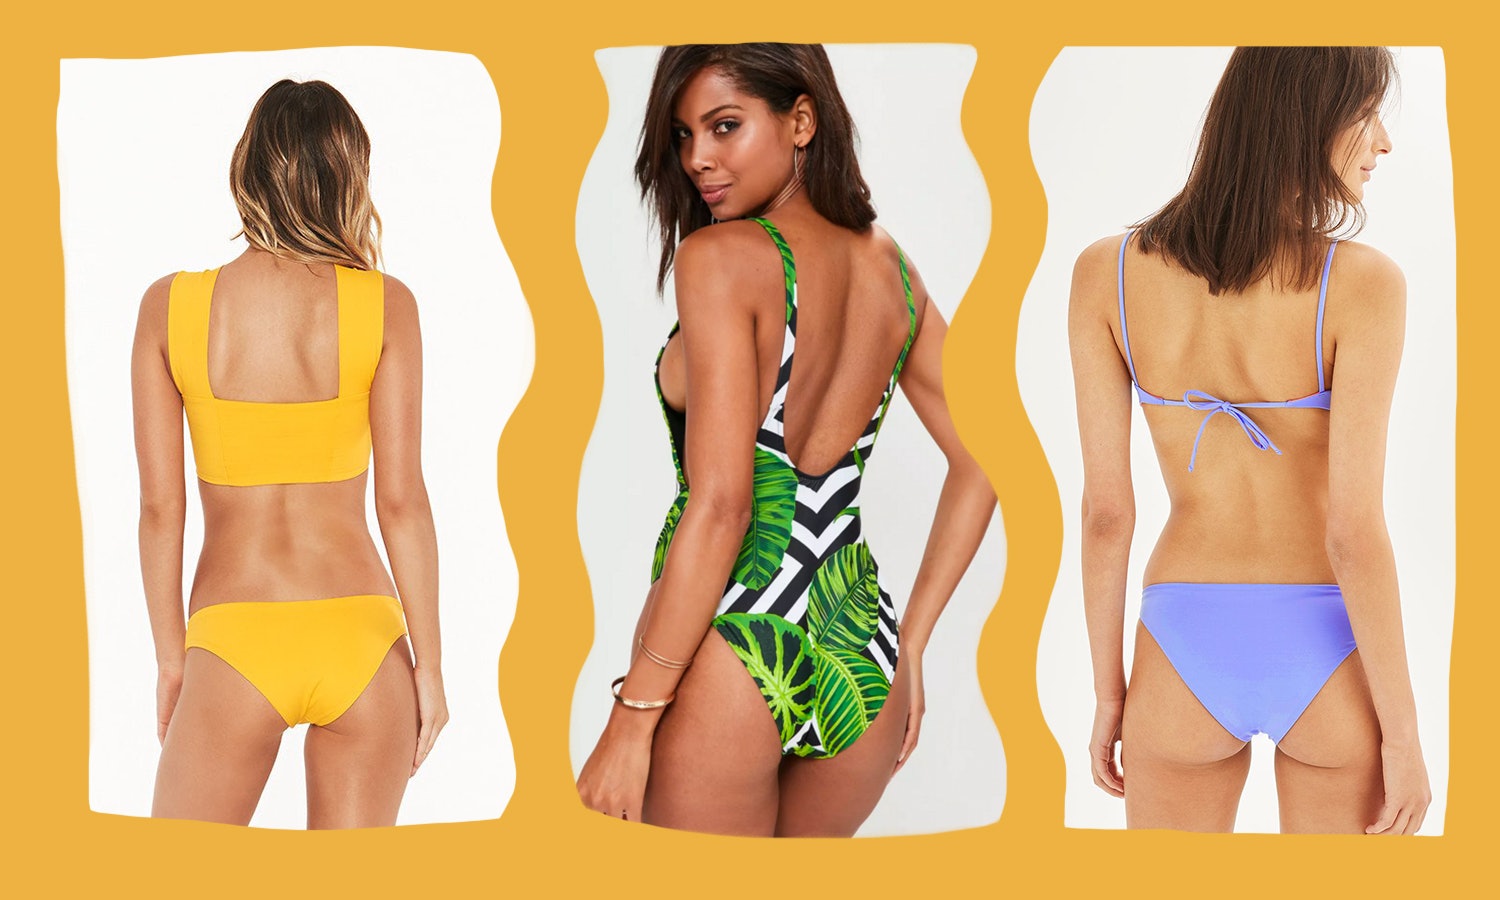 A No-Stress Guide To Finding The Best Swimsuit For Your Body